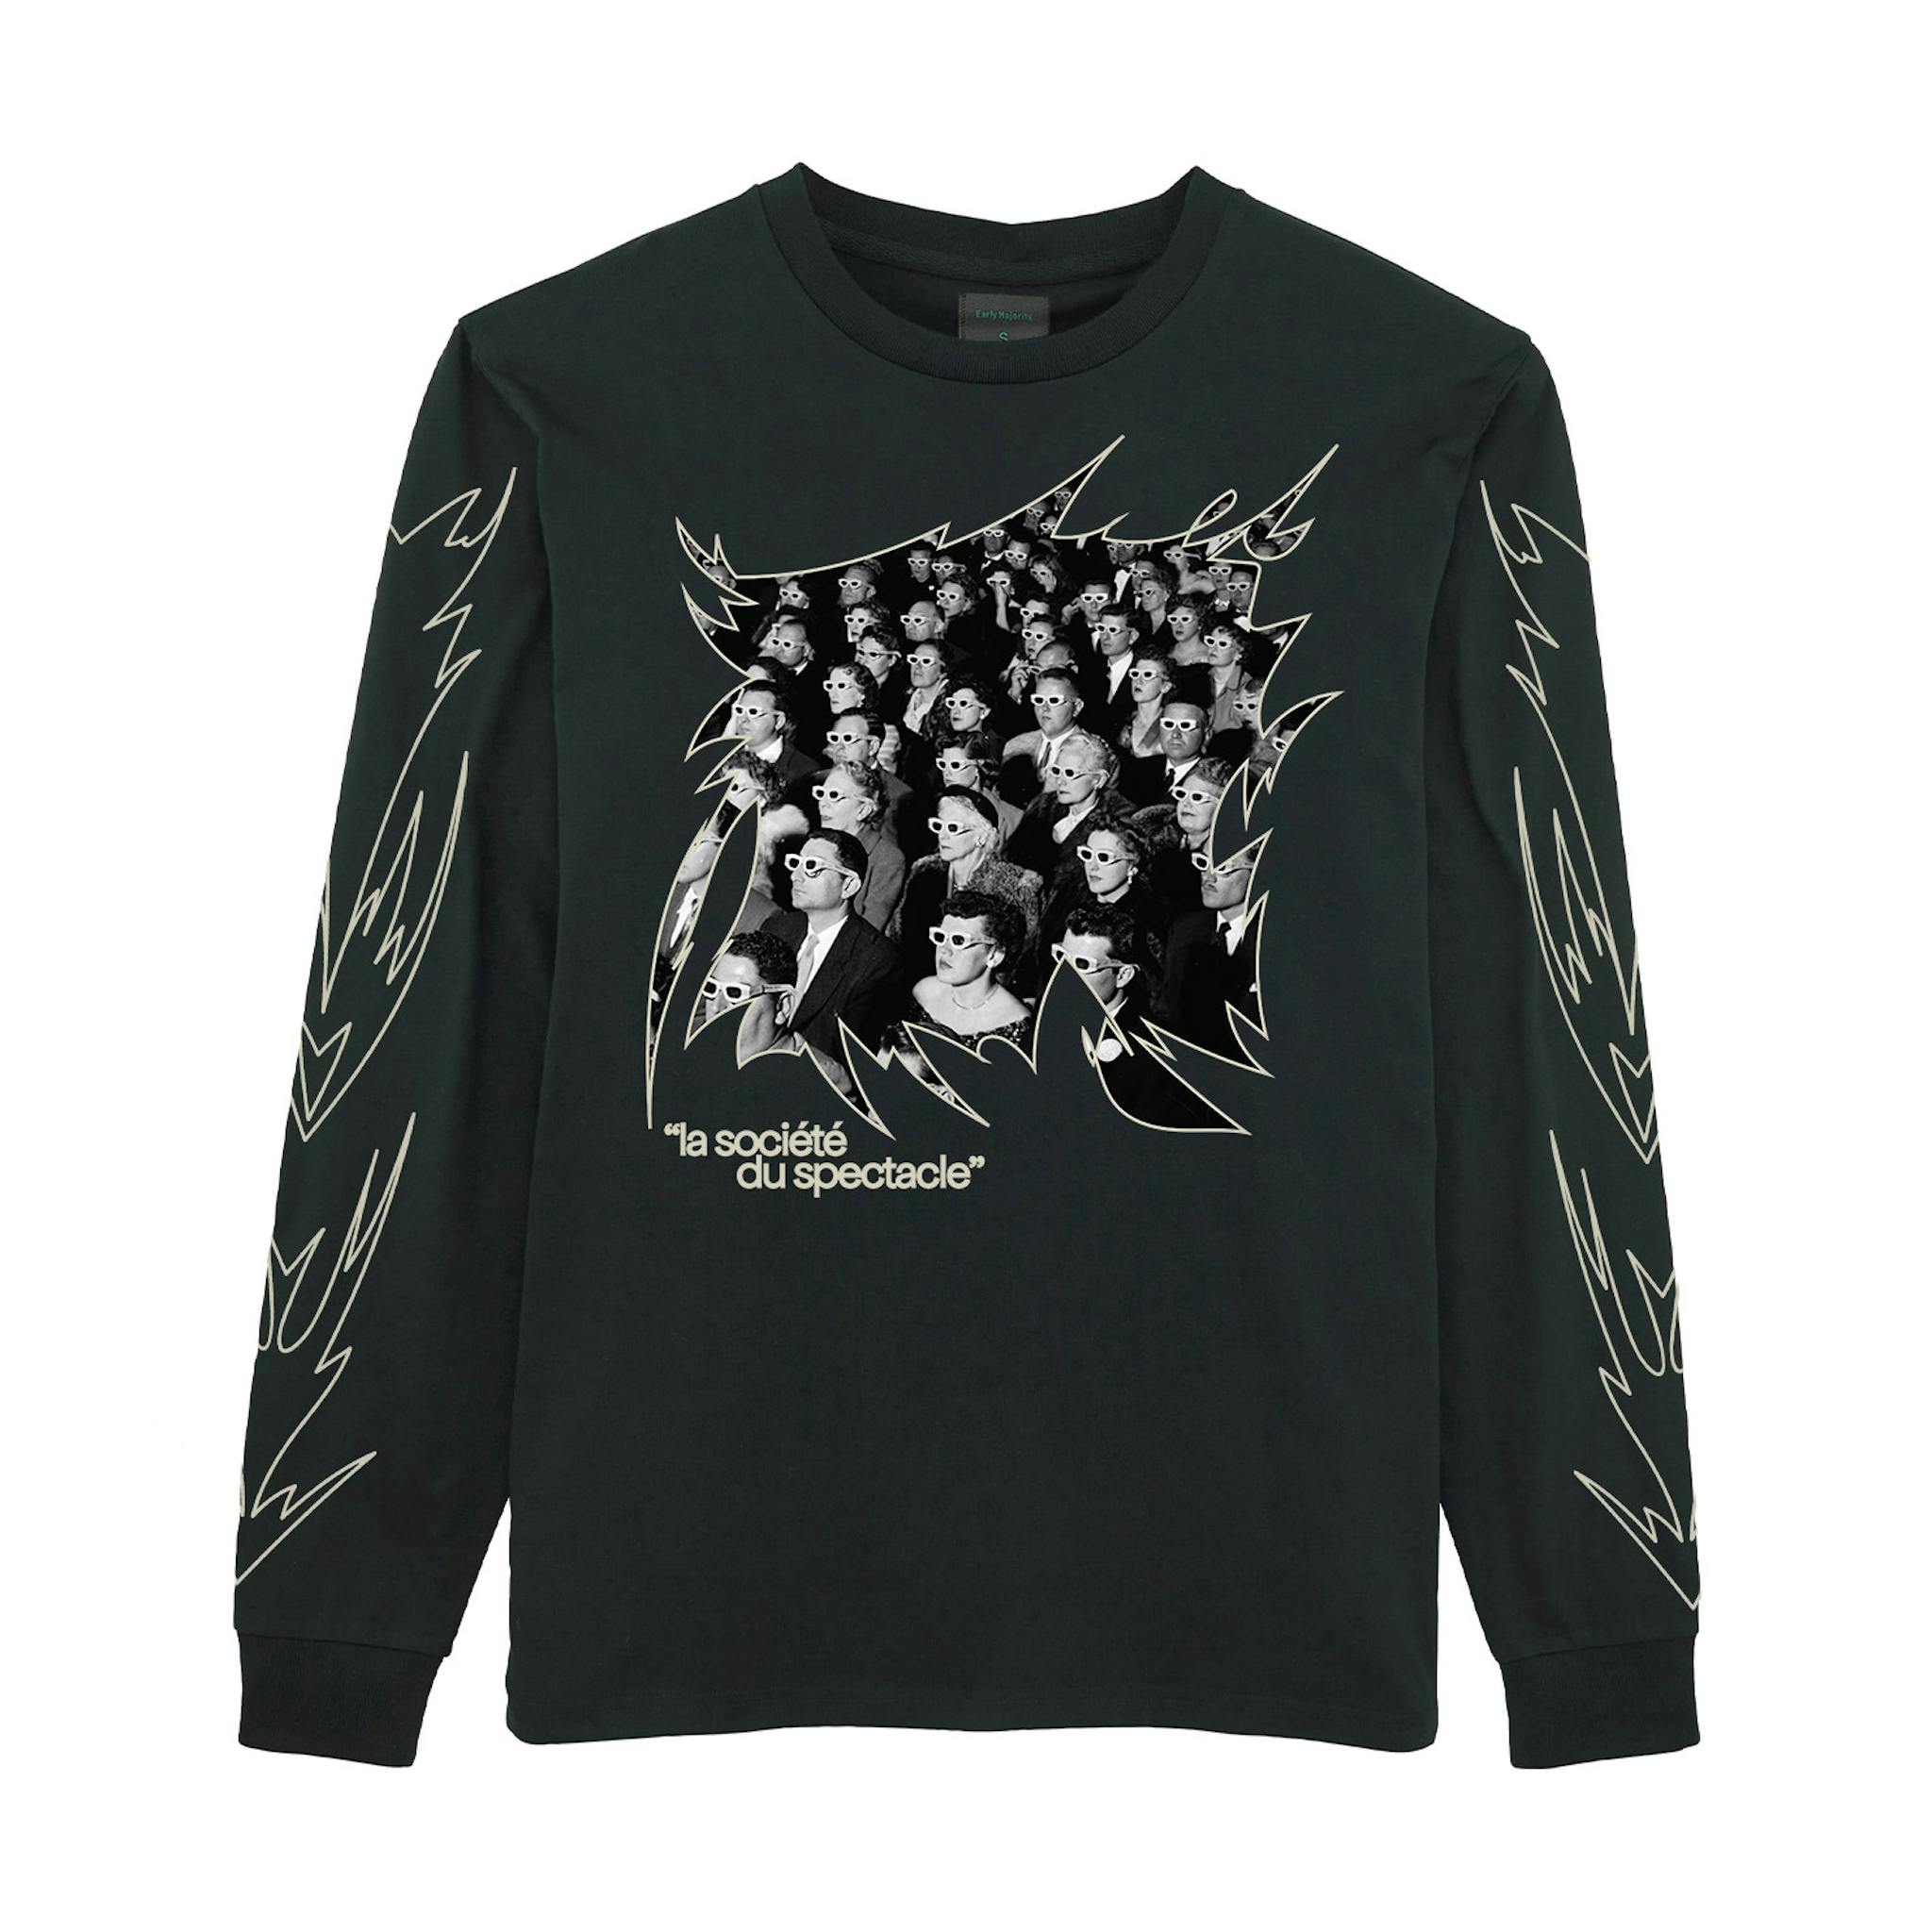 A black long-sleeve T-shirt with a graphic of an audience with glasses and the text "la société du spectacle."